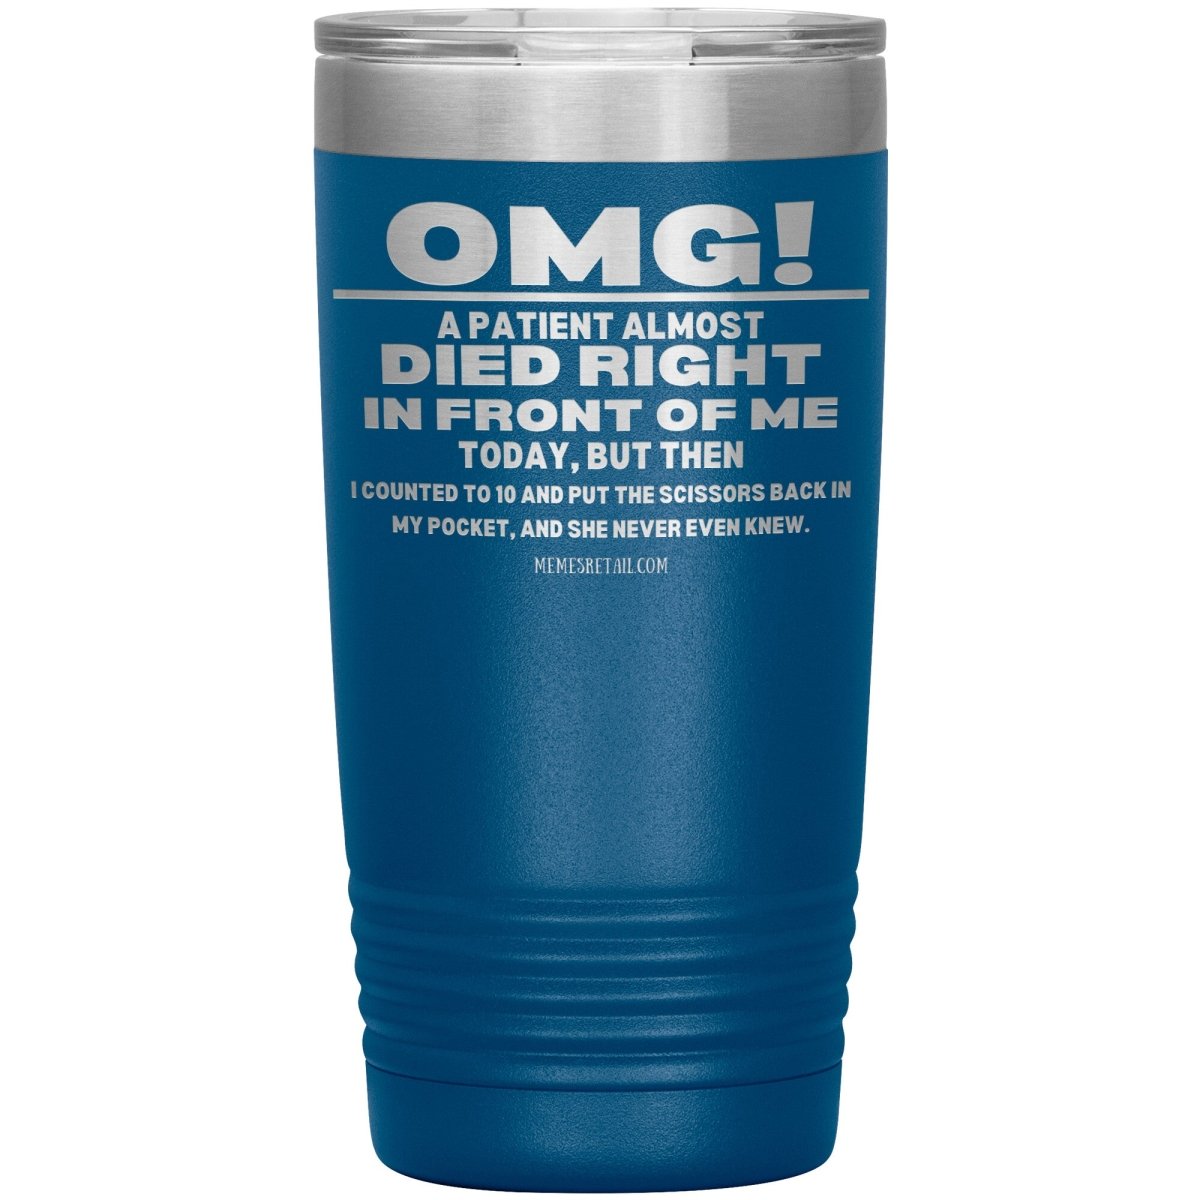 OMG! A Patient Almost Died Today Tumblers, 20oz Insulated Tumbler / Blue - MemesRetail.com